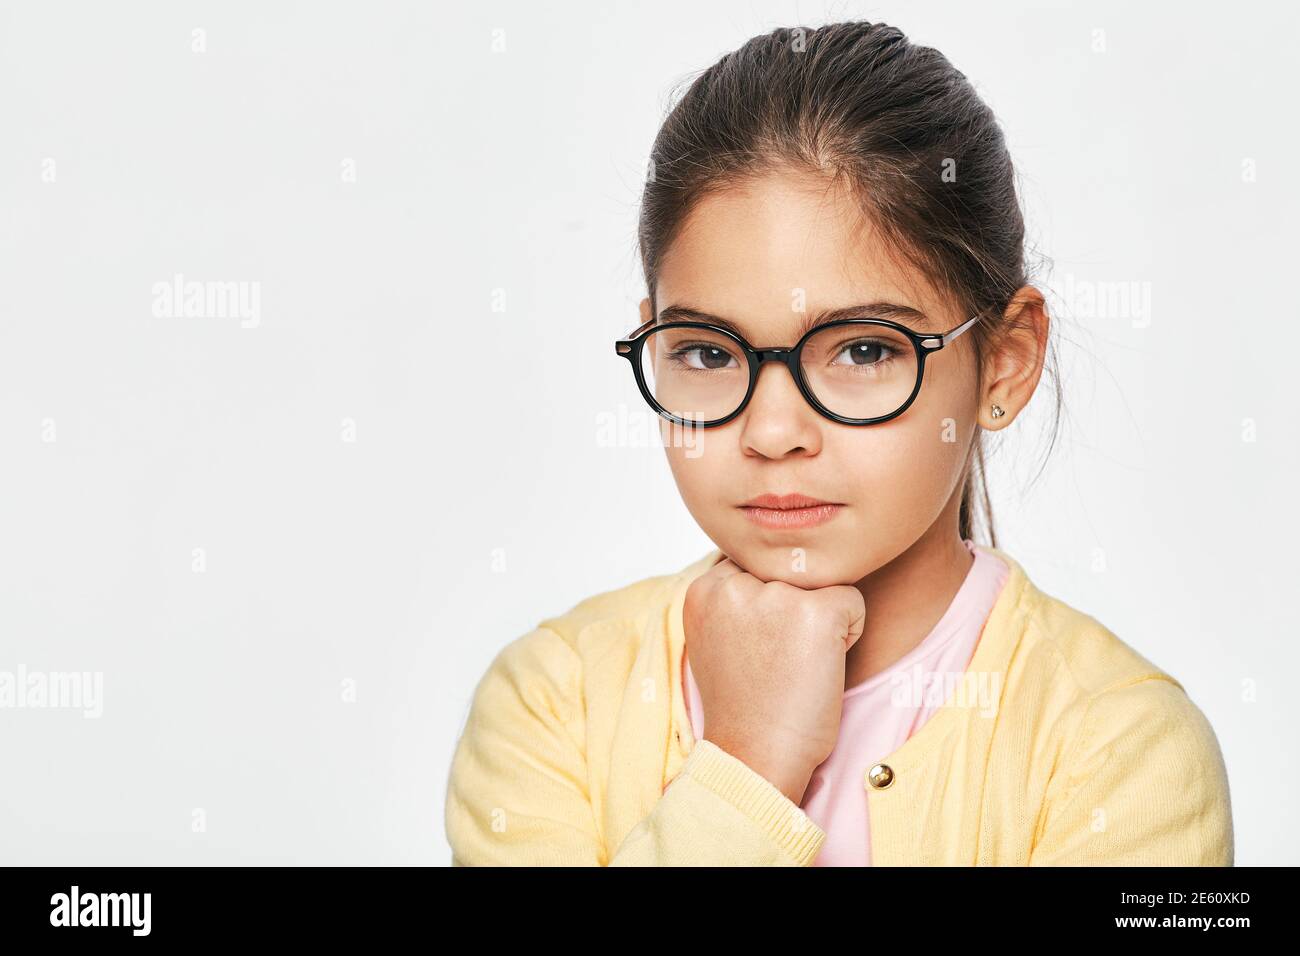 Serious Hispanic female kid wearing eyeglasses looking pensive at camera, close-up, on a white background Stock Photo